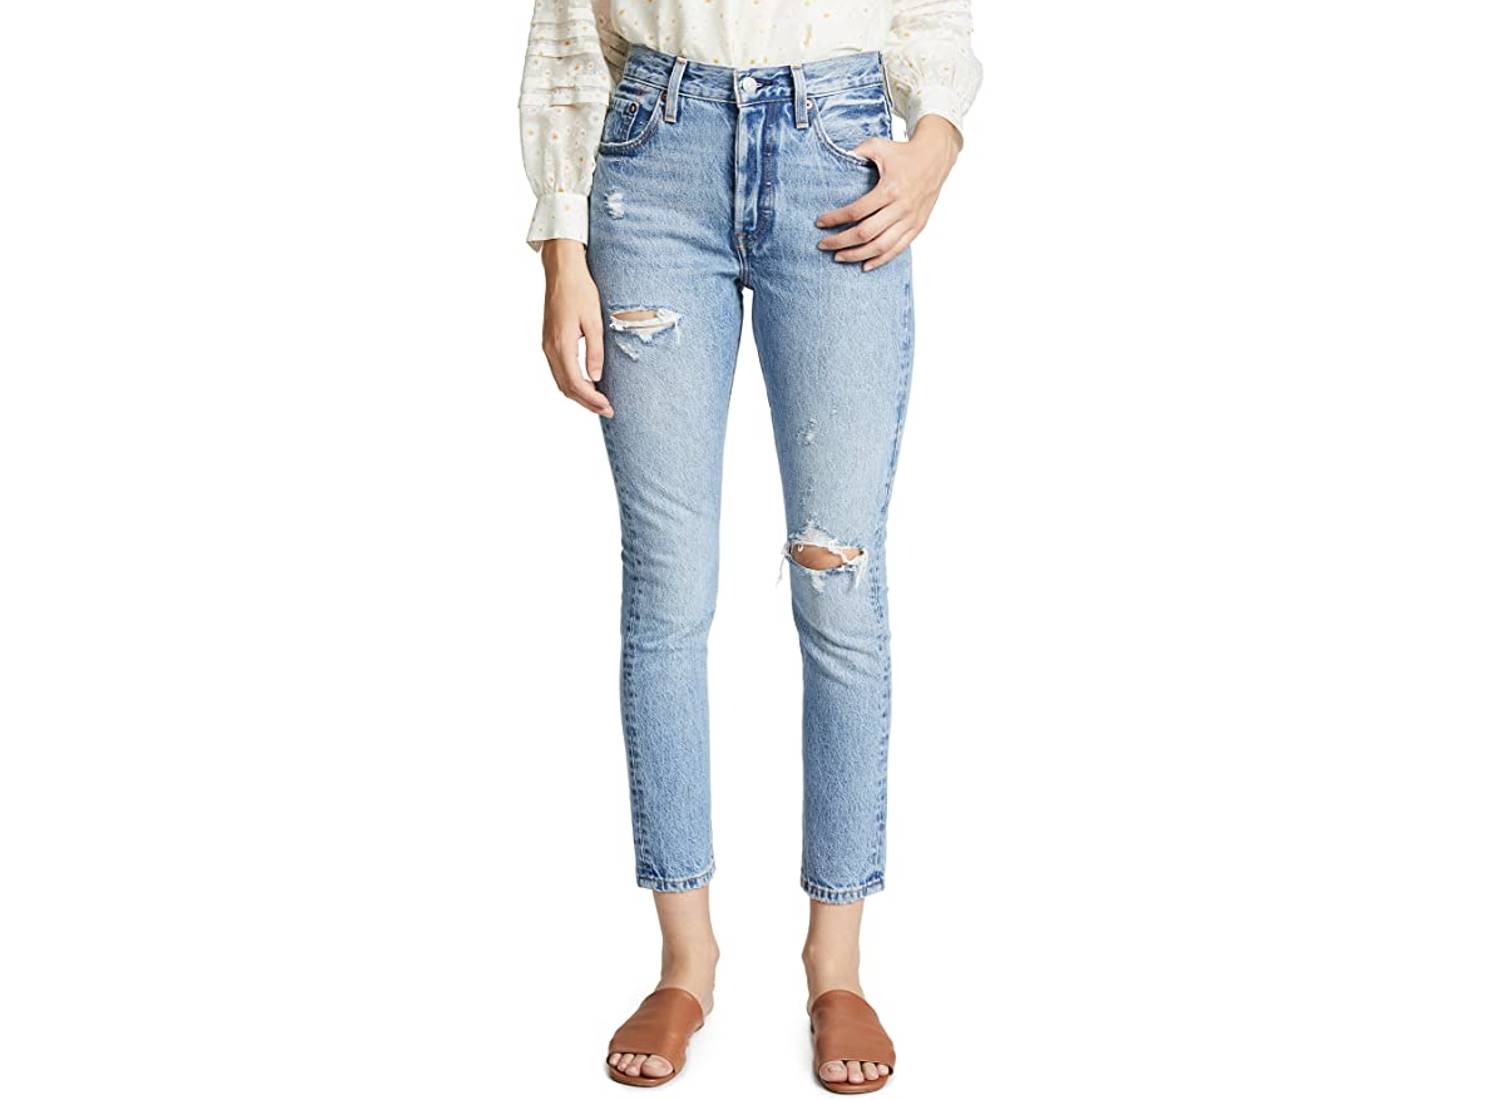 woman-wearing-ripped-levis-501-skinny-jeans